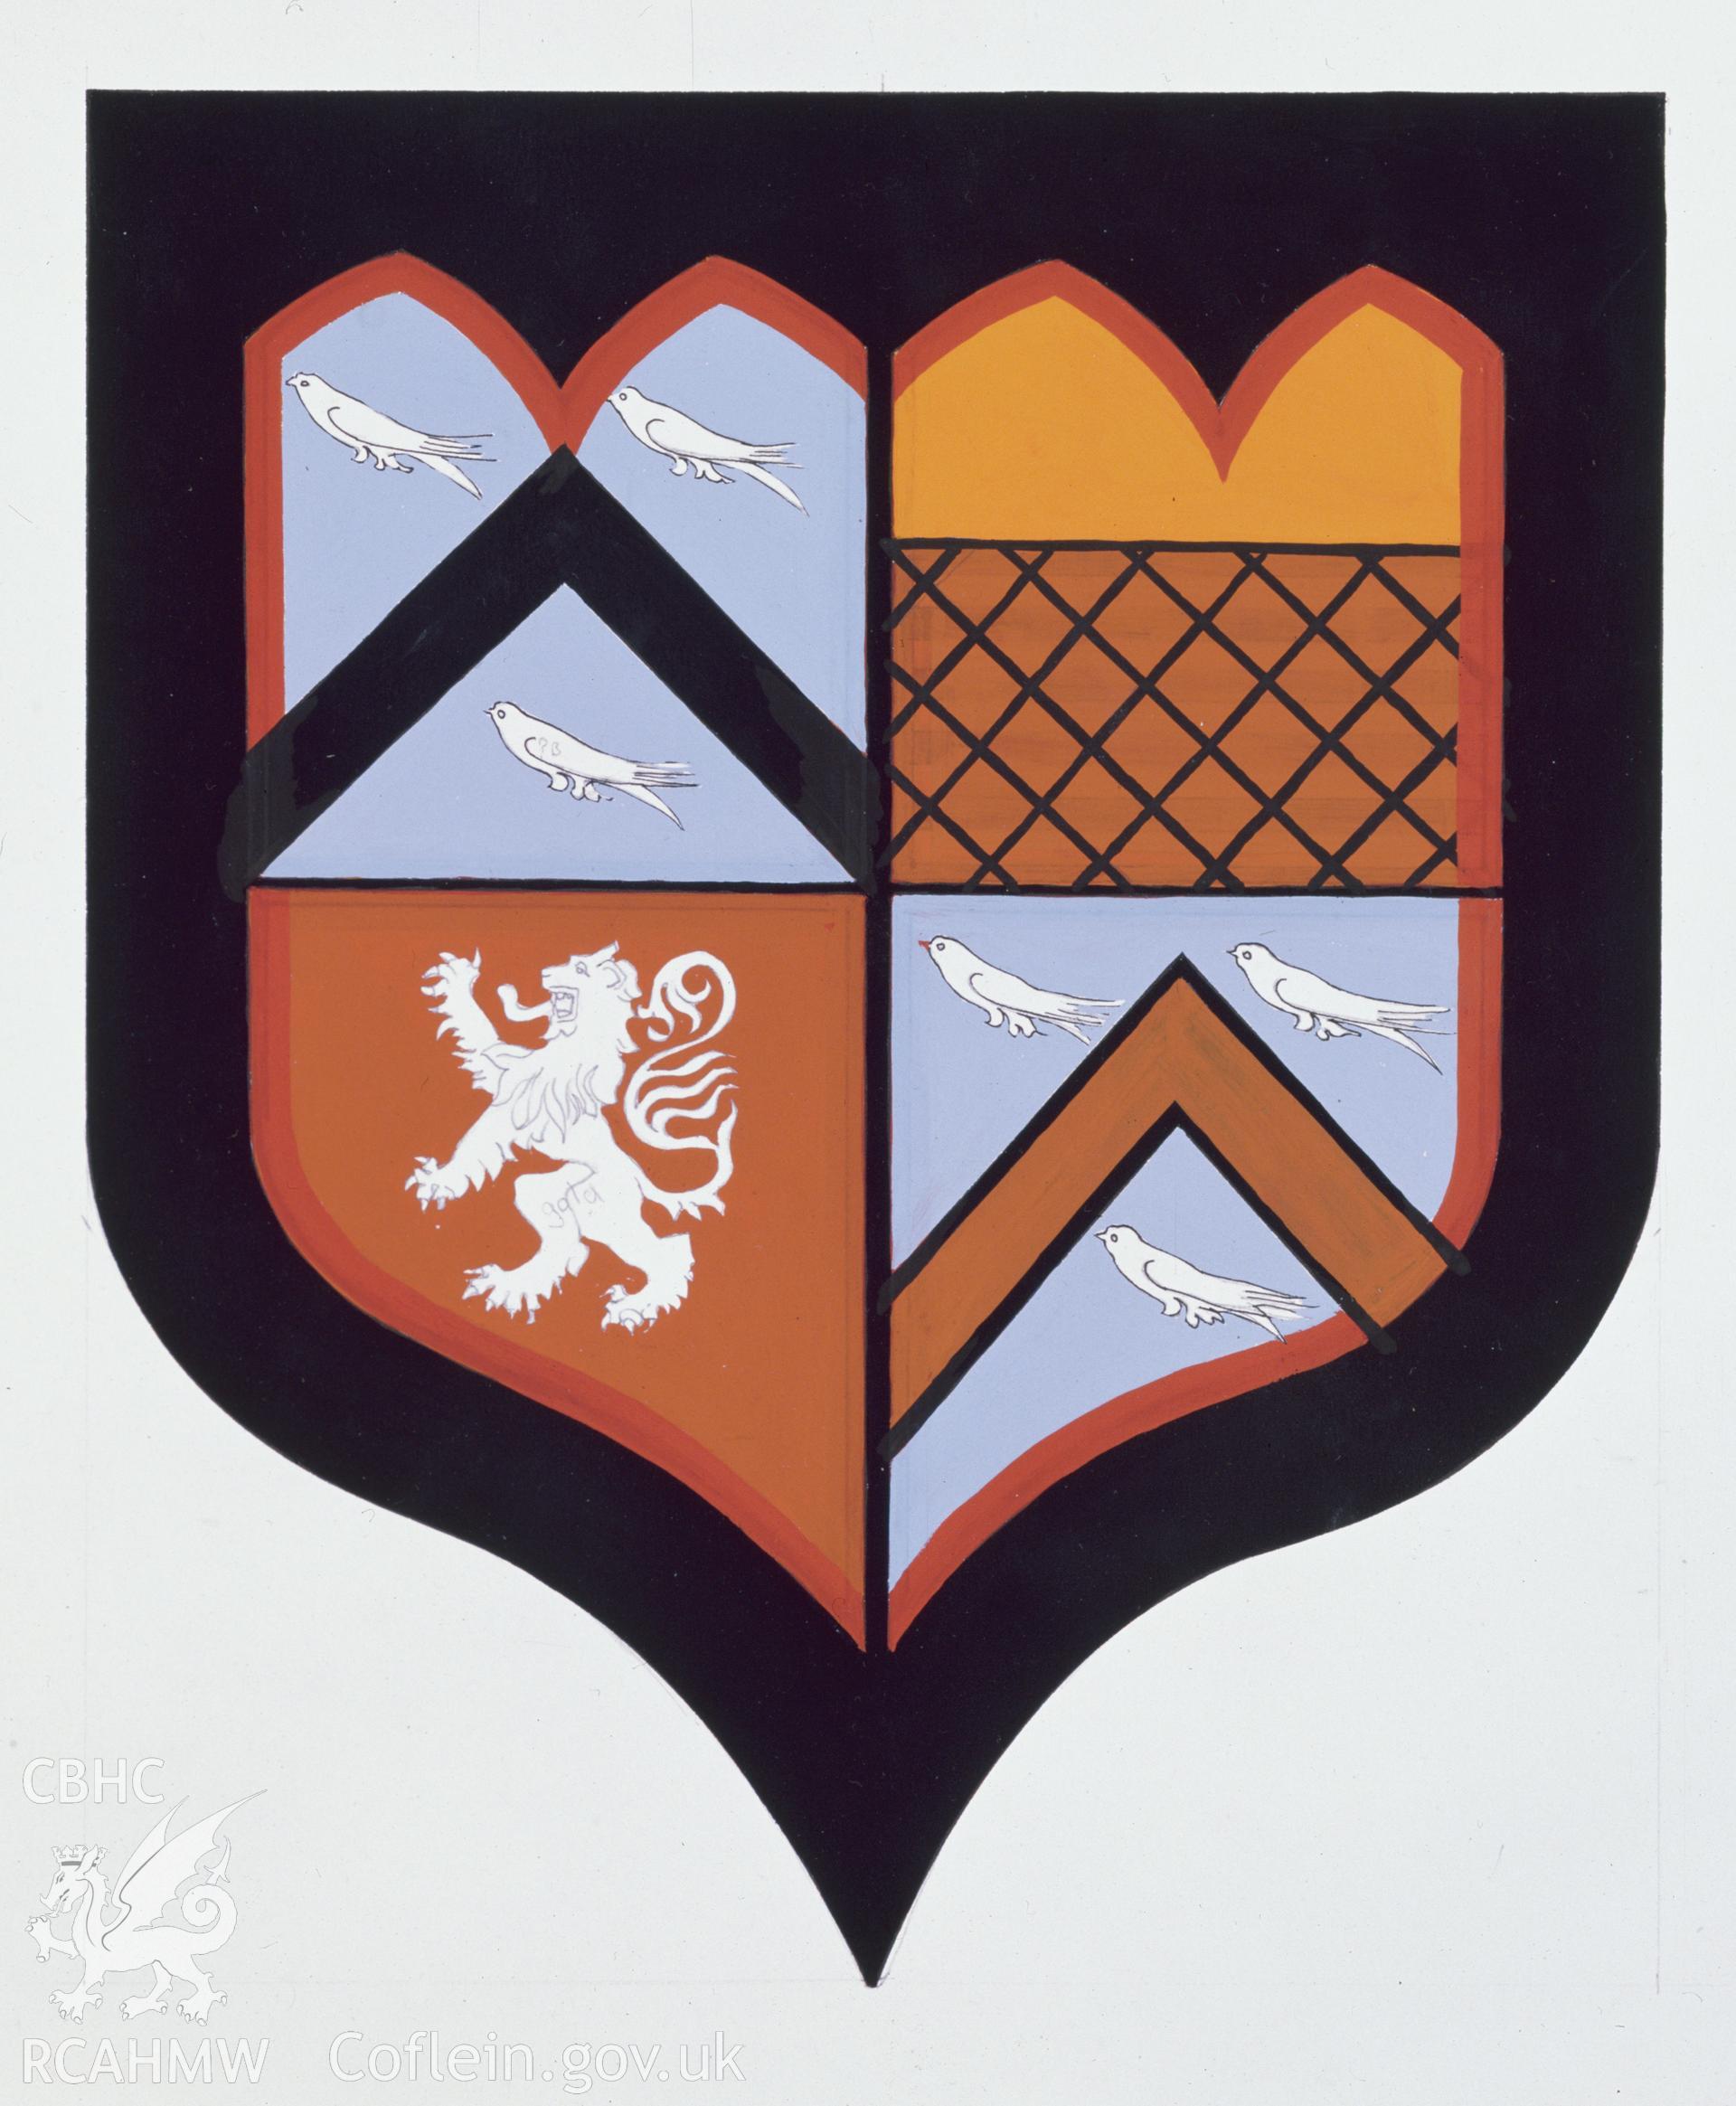 RCAHMW colour transparency of artwork by Dylan Roberts, showing coat of arms at Upton Chapel.